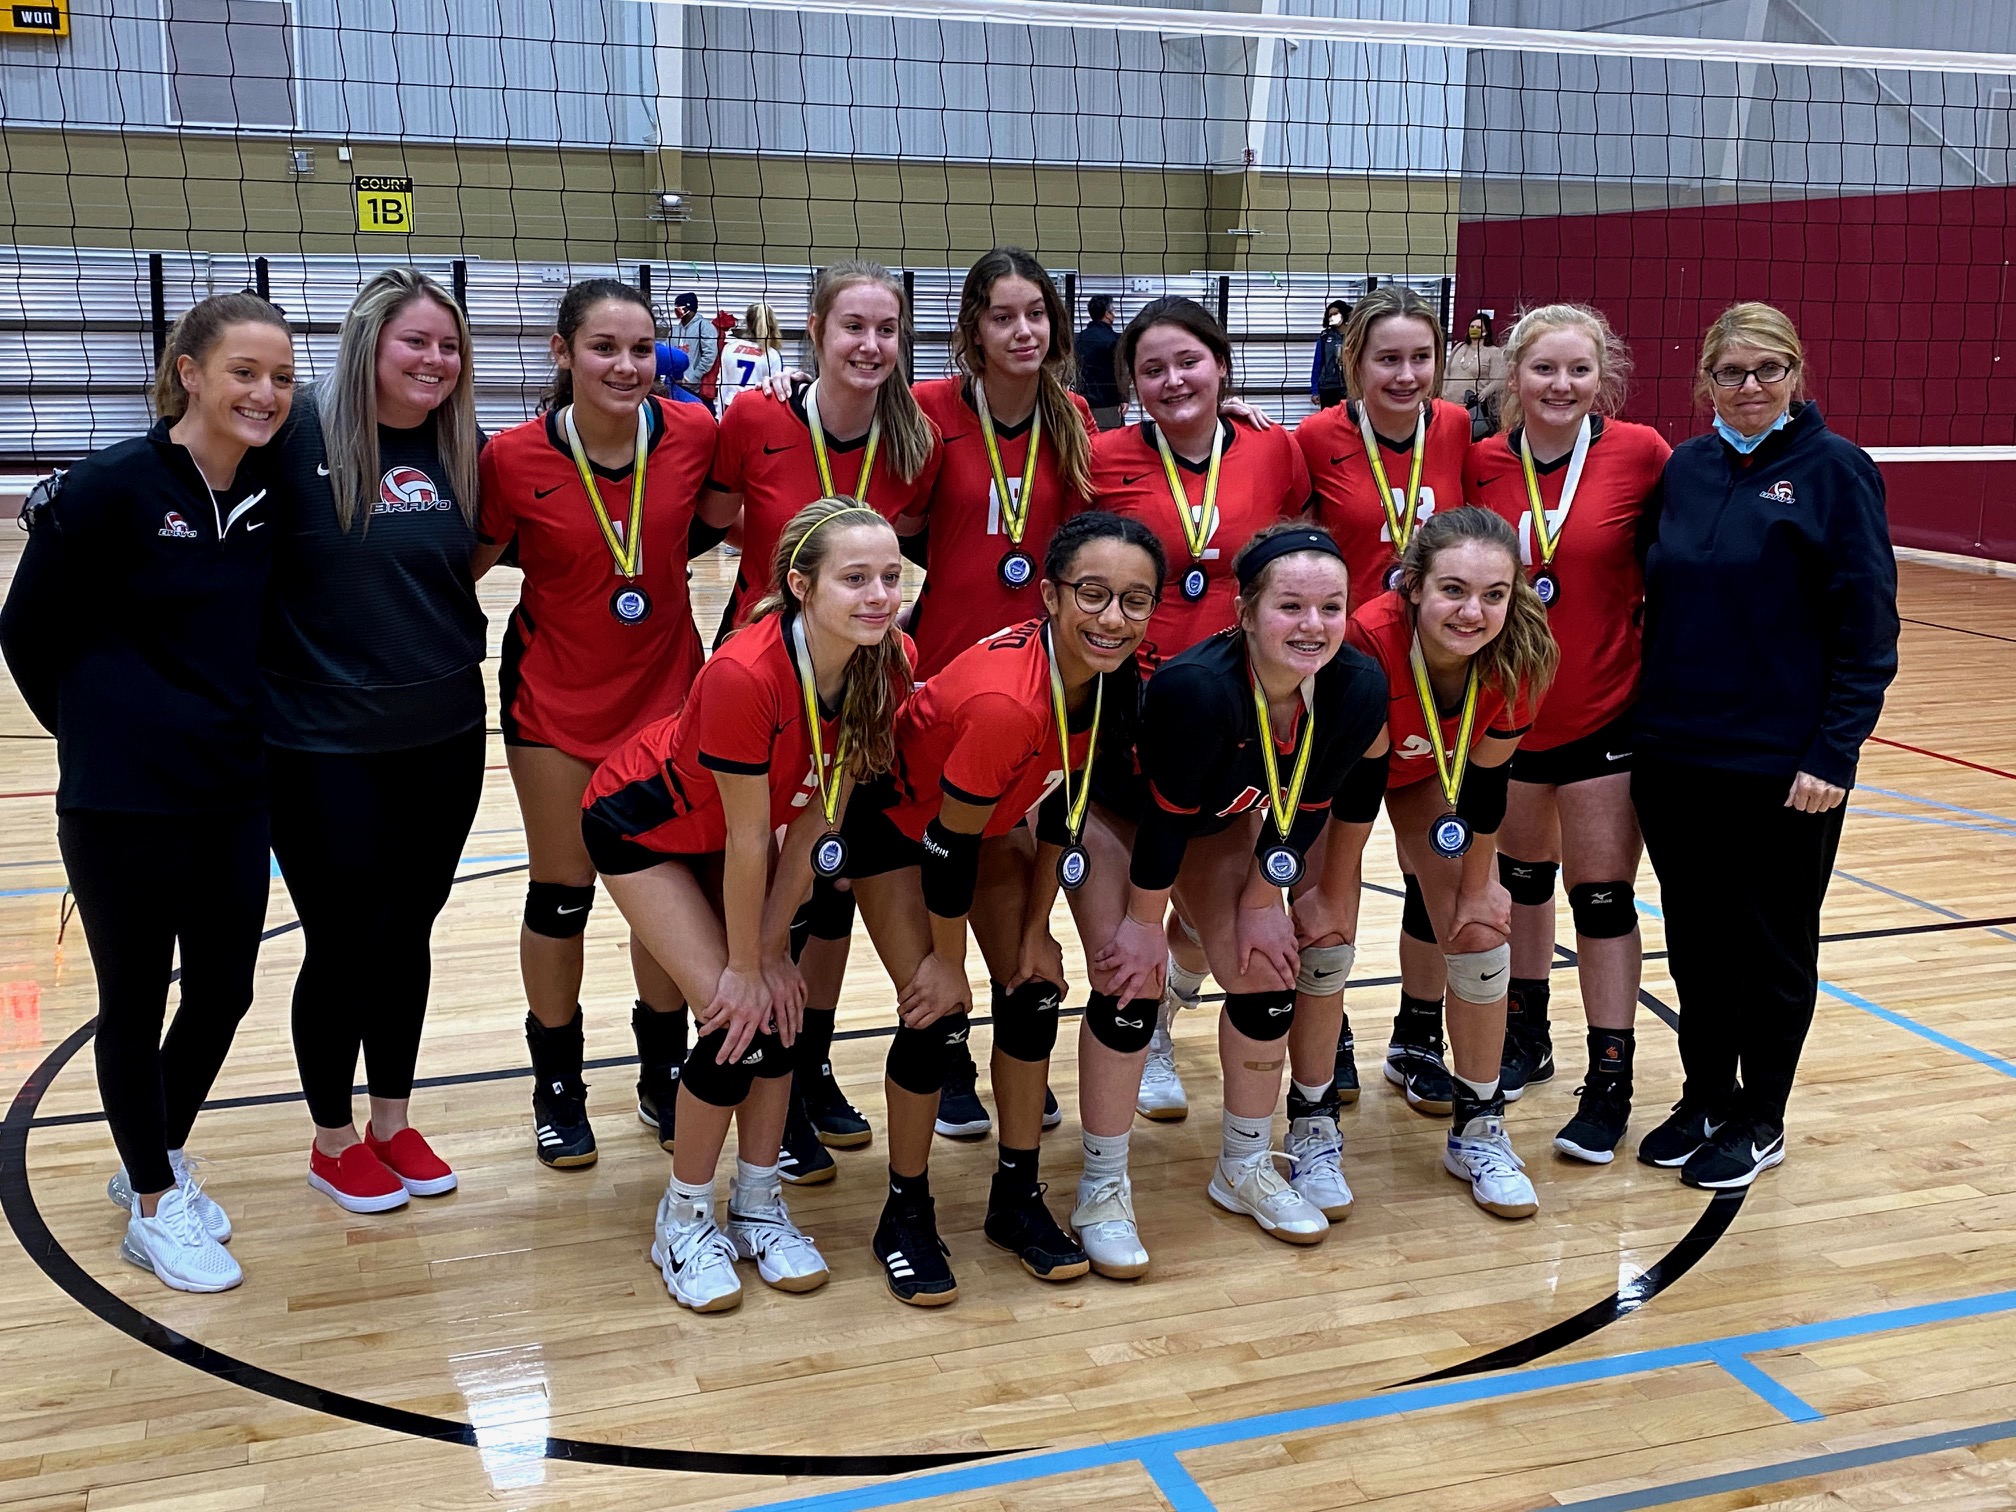 Bravo 15 Black Volleyball team prepares for AAU Nationals WNKY News